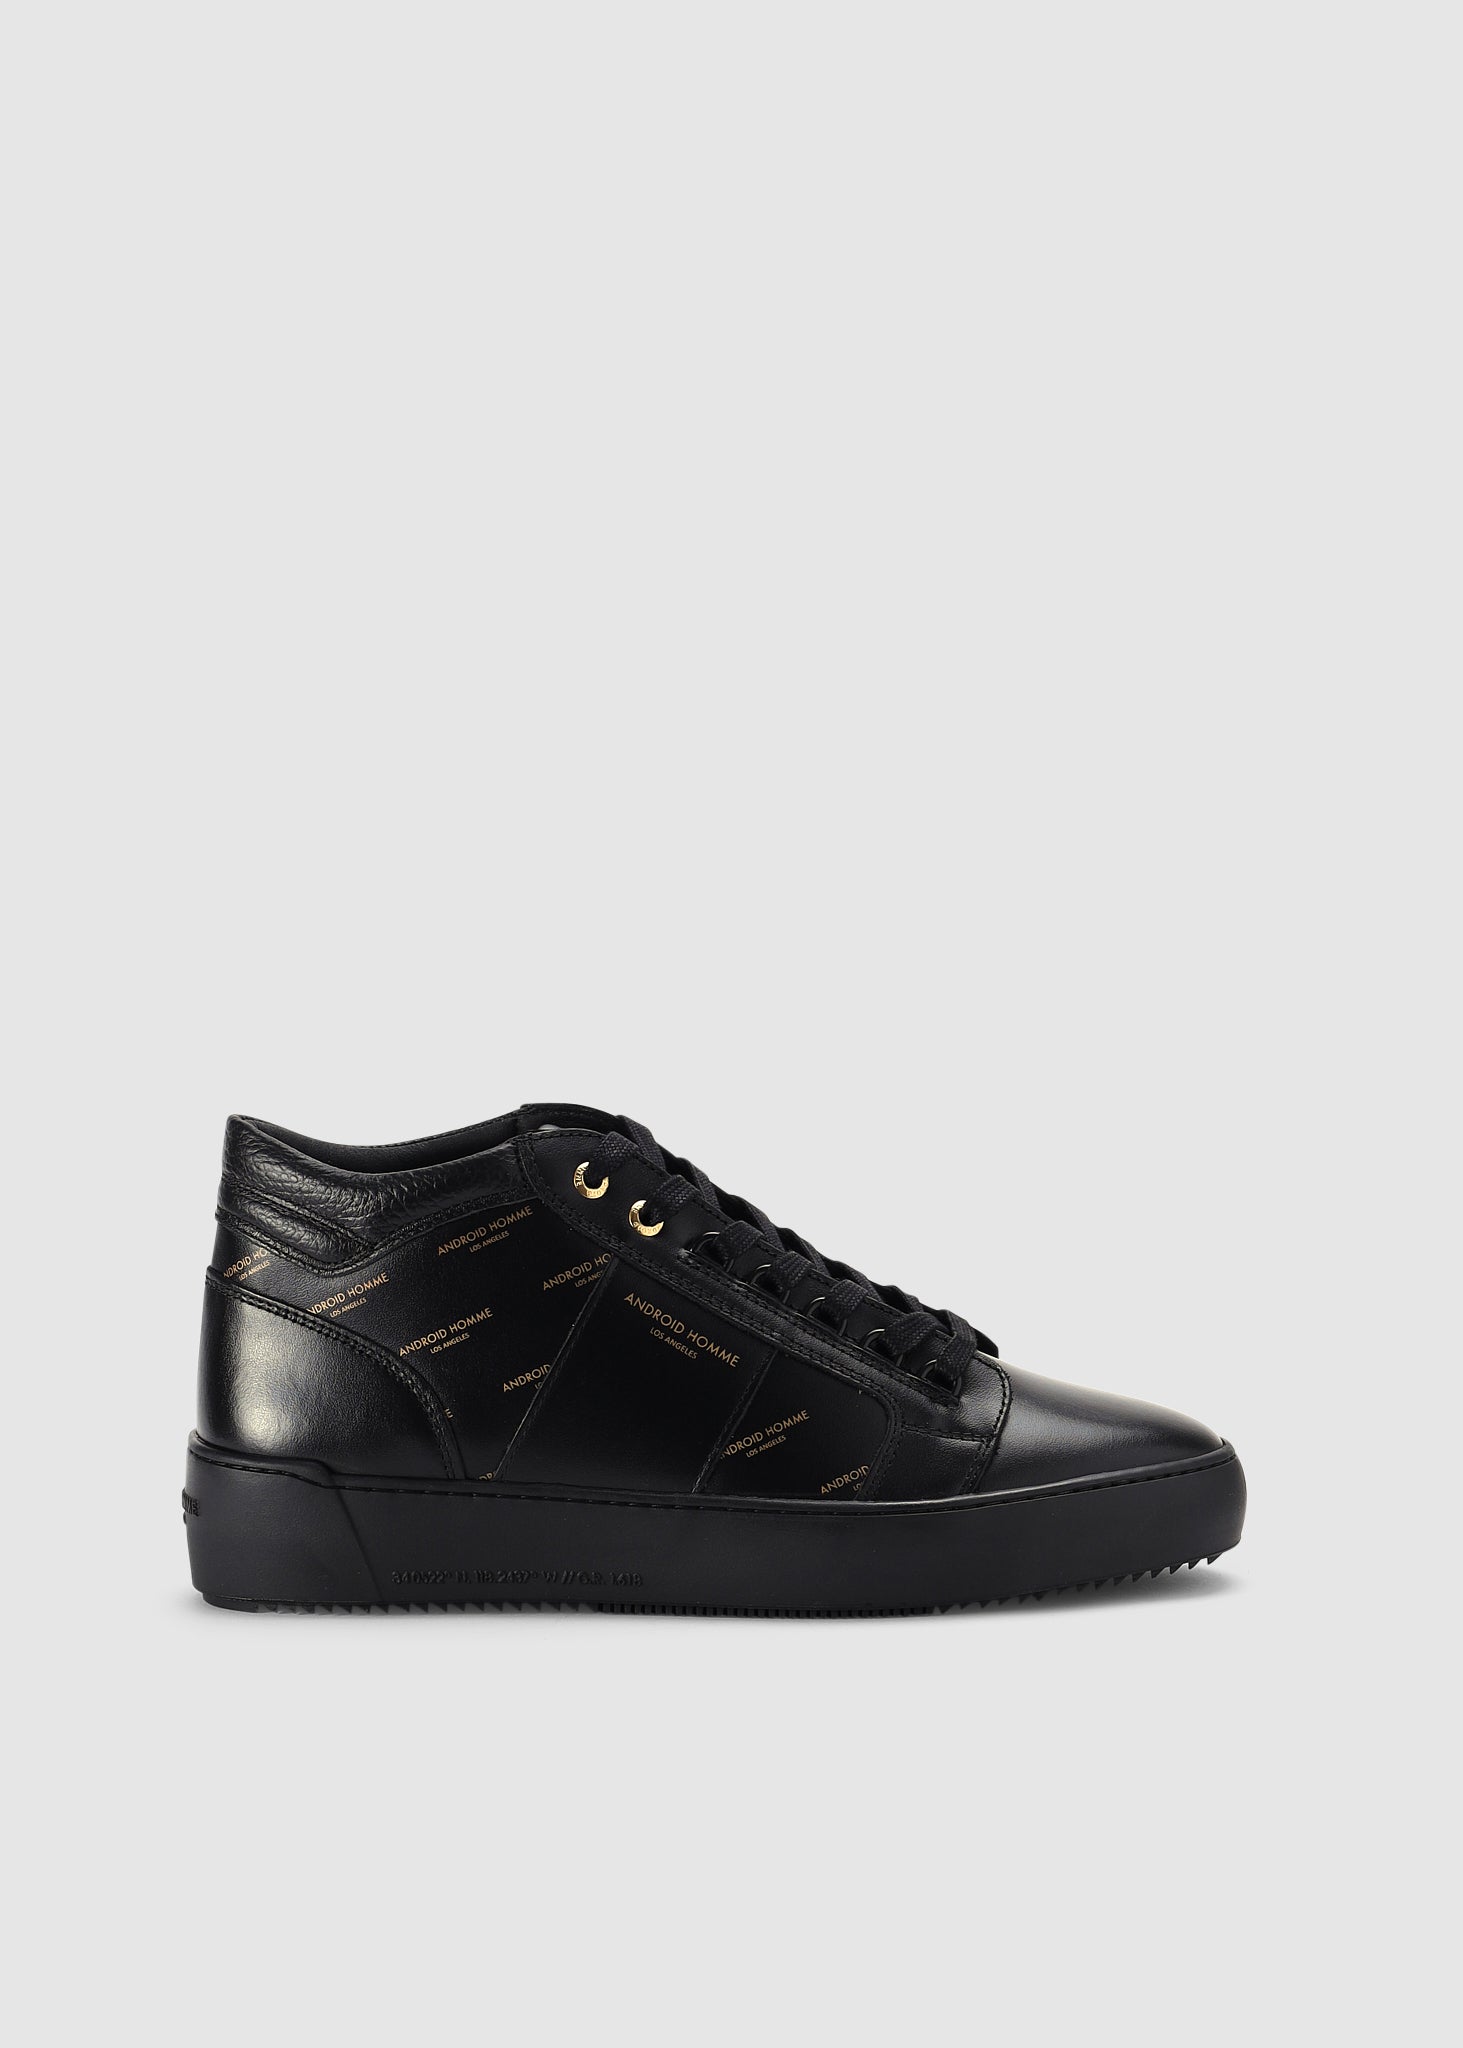 Android Homme Mens Propulsion Mid Trainers